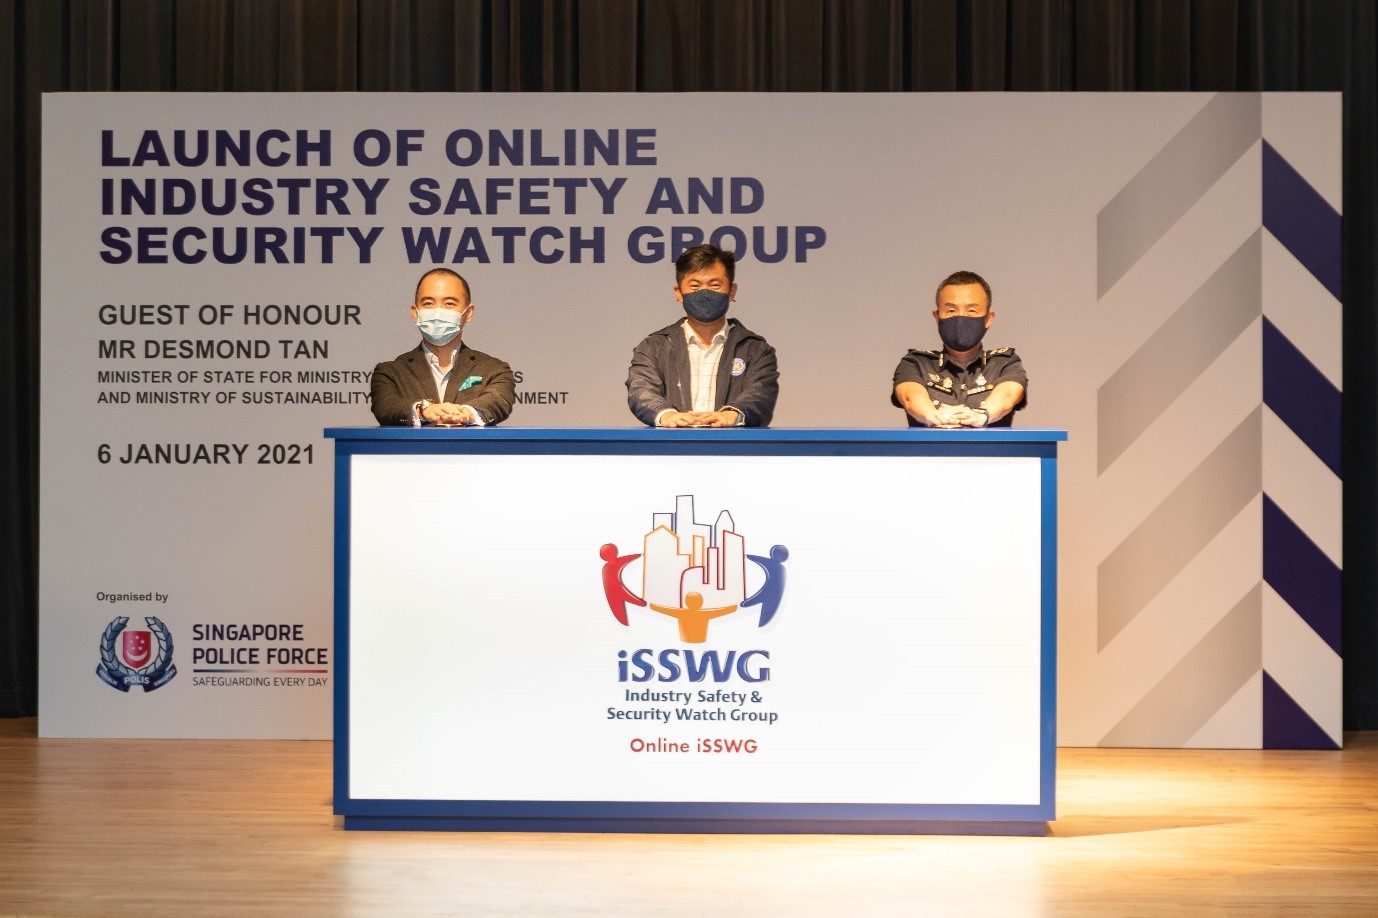 20210106_launch_of_the_online_industry_safety_and_security_watch_group_1